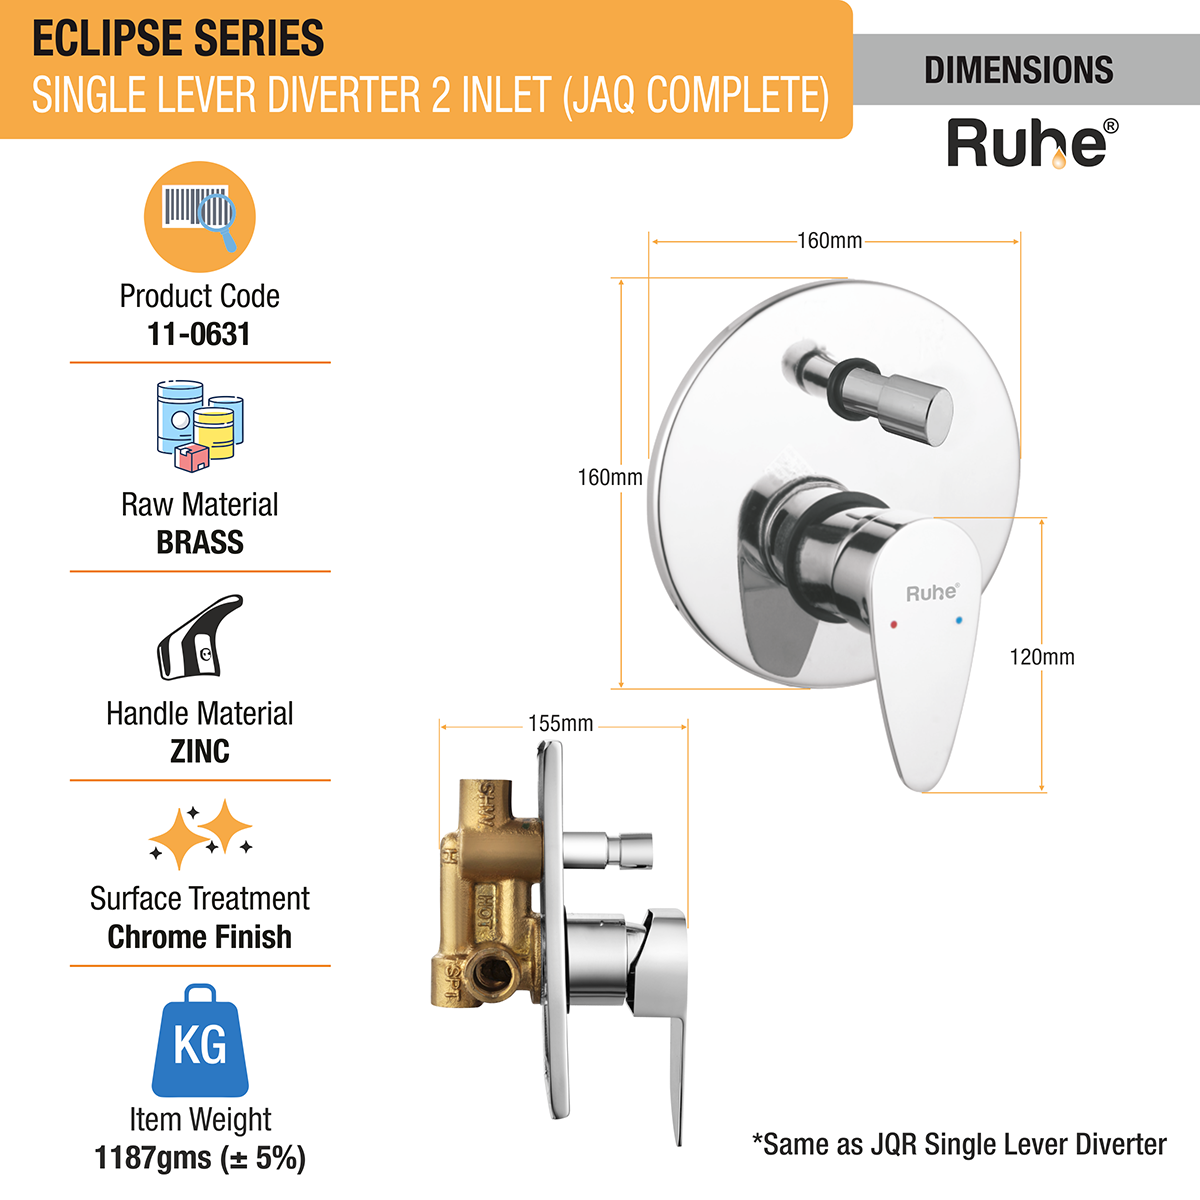 Eclipse Single Lever 2-inlet Diverter (JAQ Complete Set) dimensions, raw material, item weight